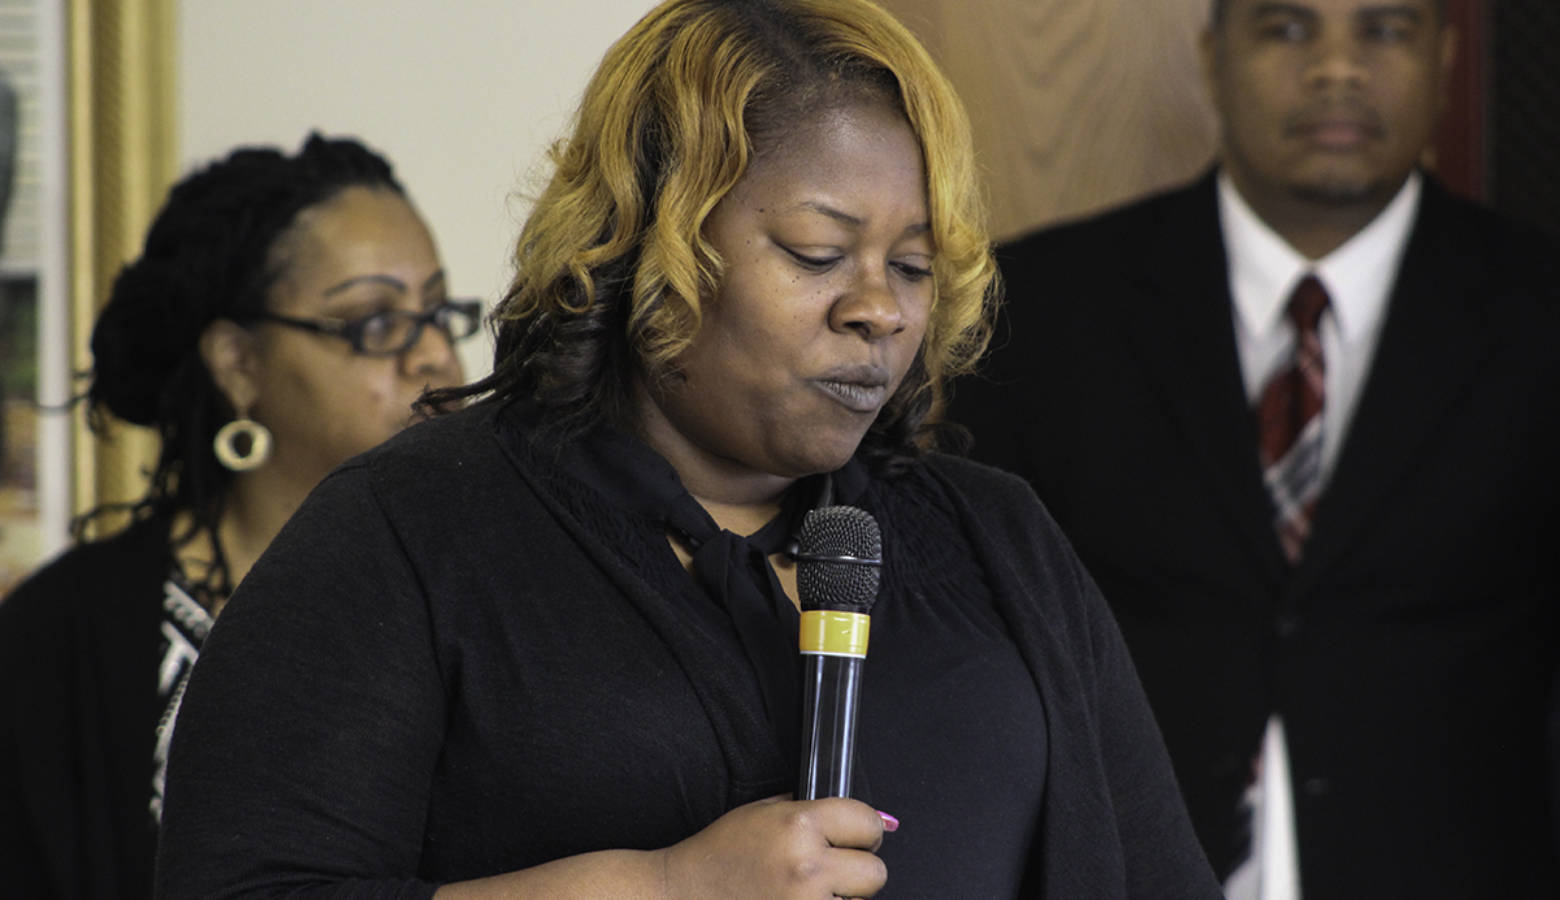 Keesha Daniels advocates for Calumet residents with state and national NAACP leaders the day EPA Administrator Scott Pruitt visted East Chicago. Pruitt was invited to the NAACP meeting, but declined to attend. (Annie Ropeik/IPB News)